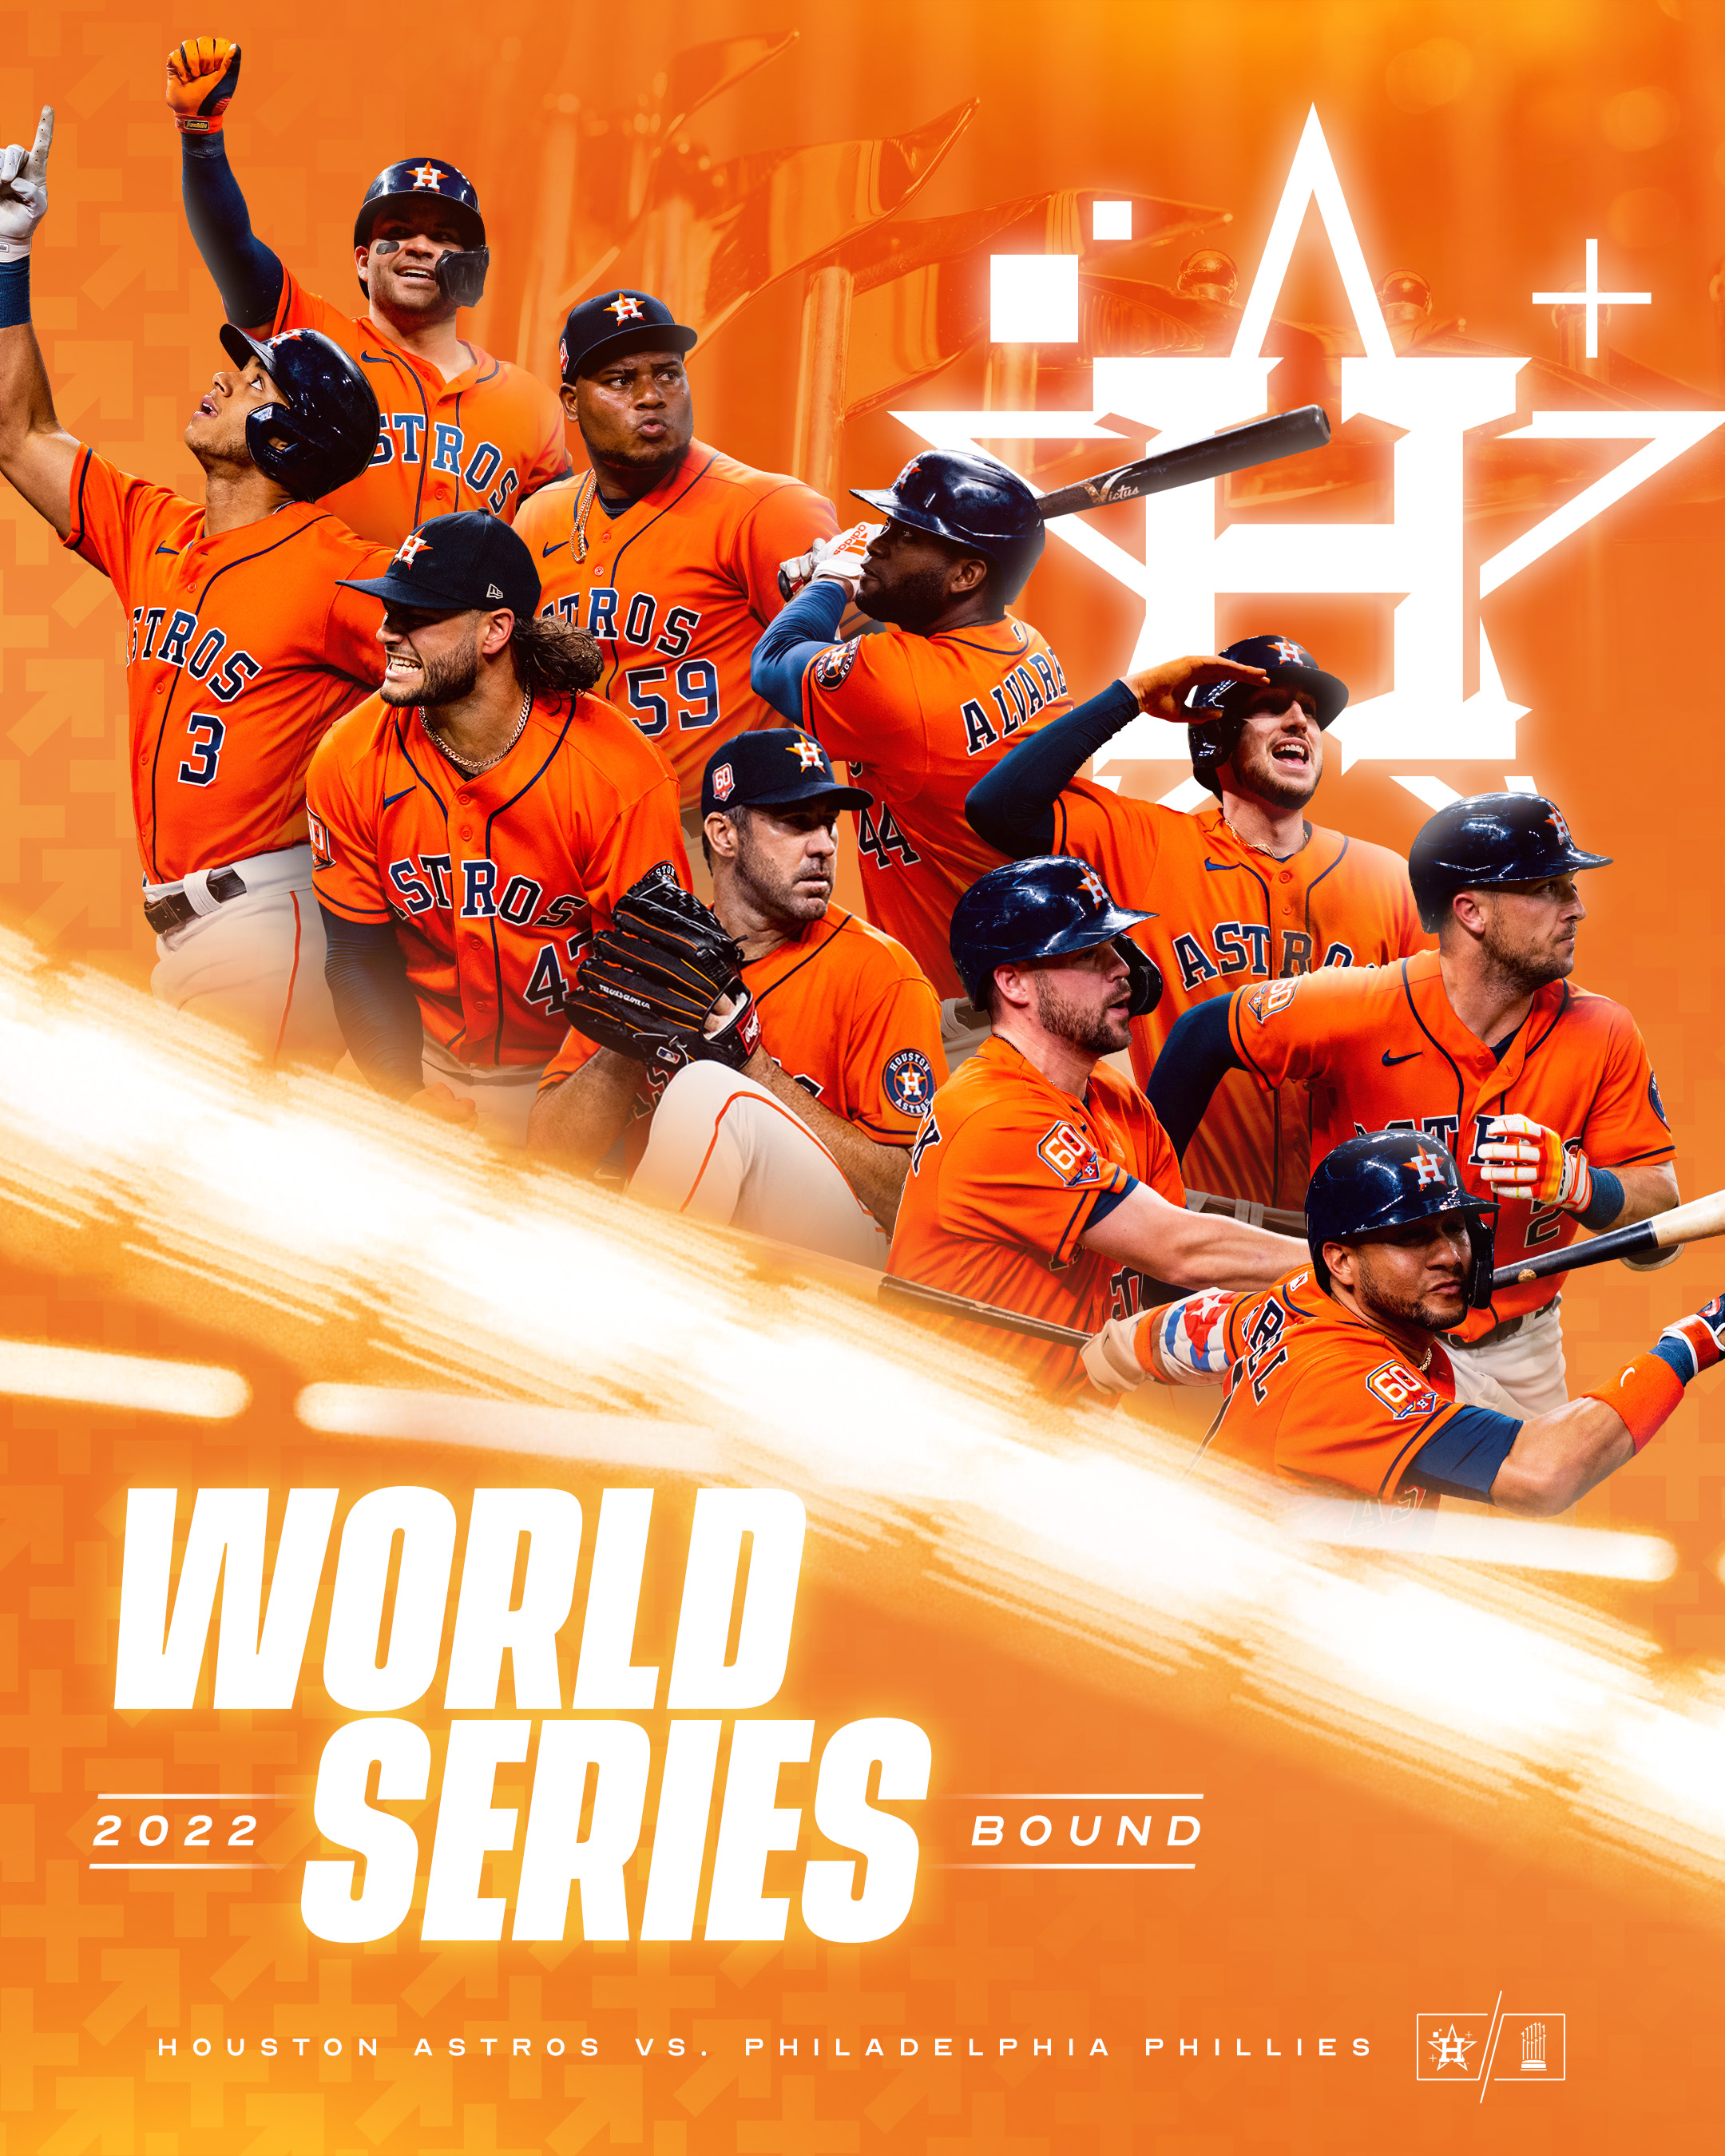 astros going to world series 2022